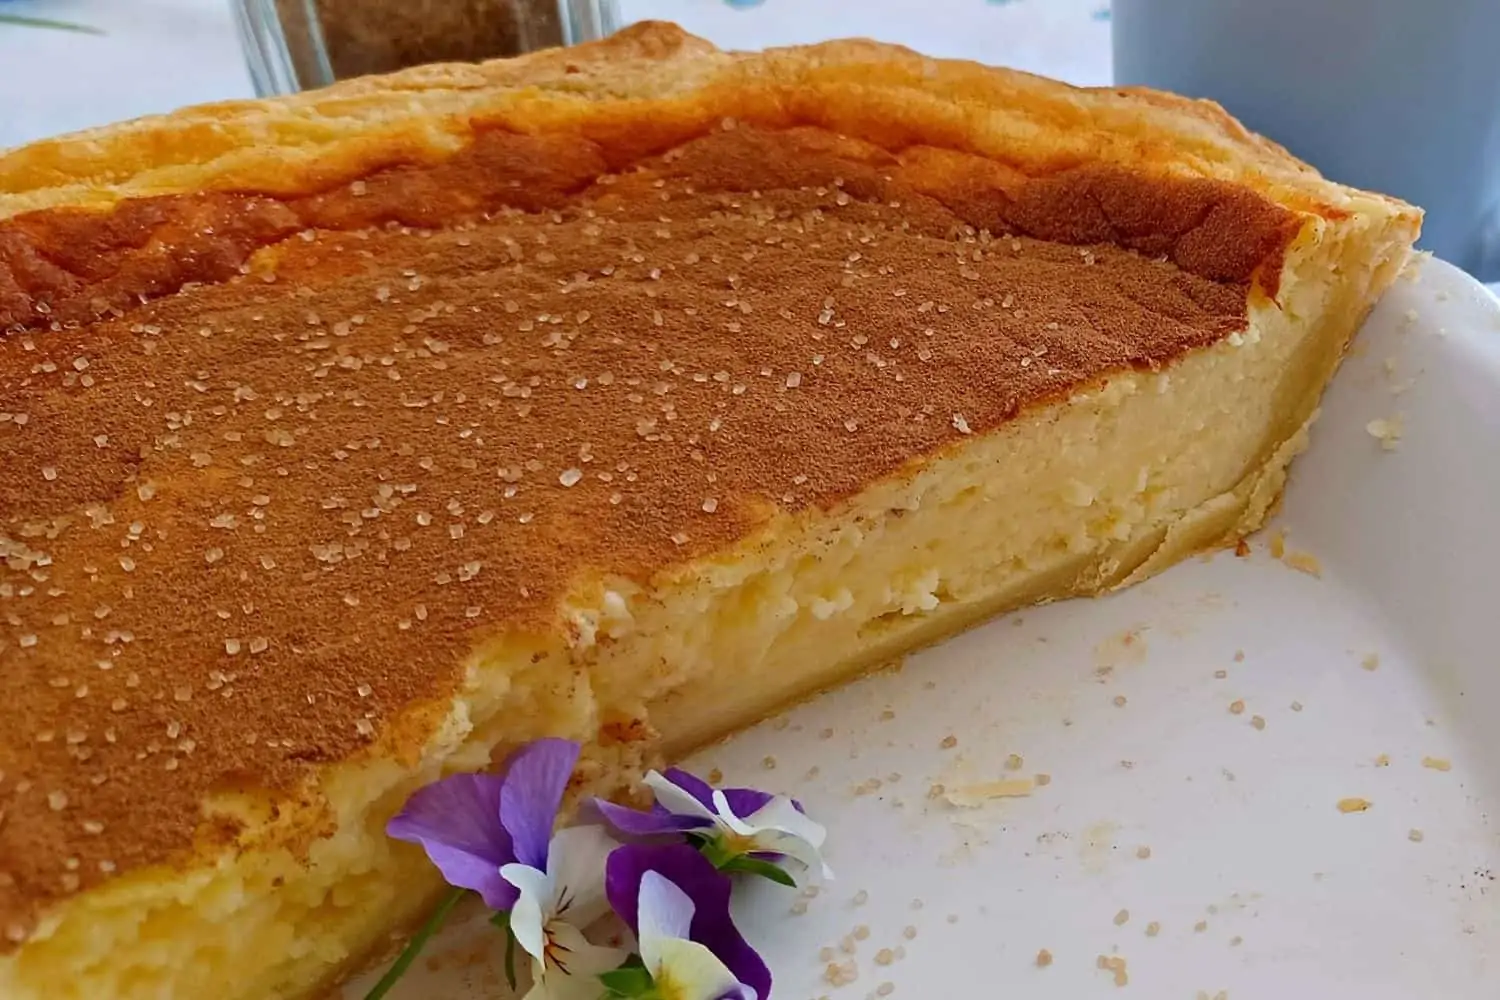 Baked Milk tart, a traditional South African dessert, is a smooth and creamy custard filling baked in a sweet pastry crust.